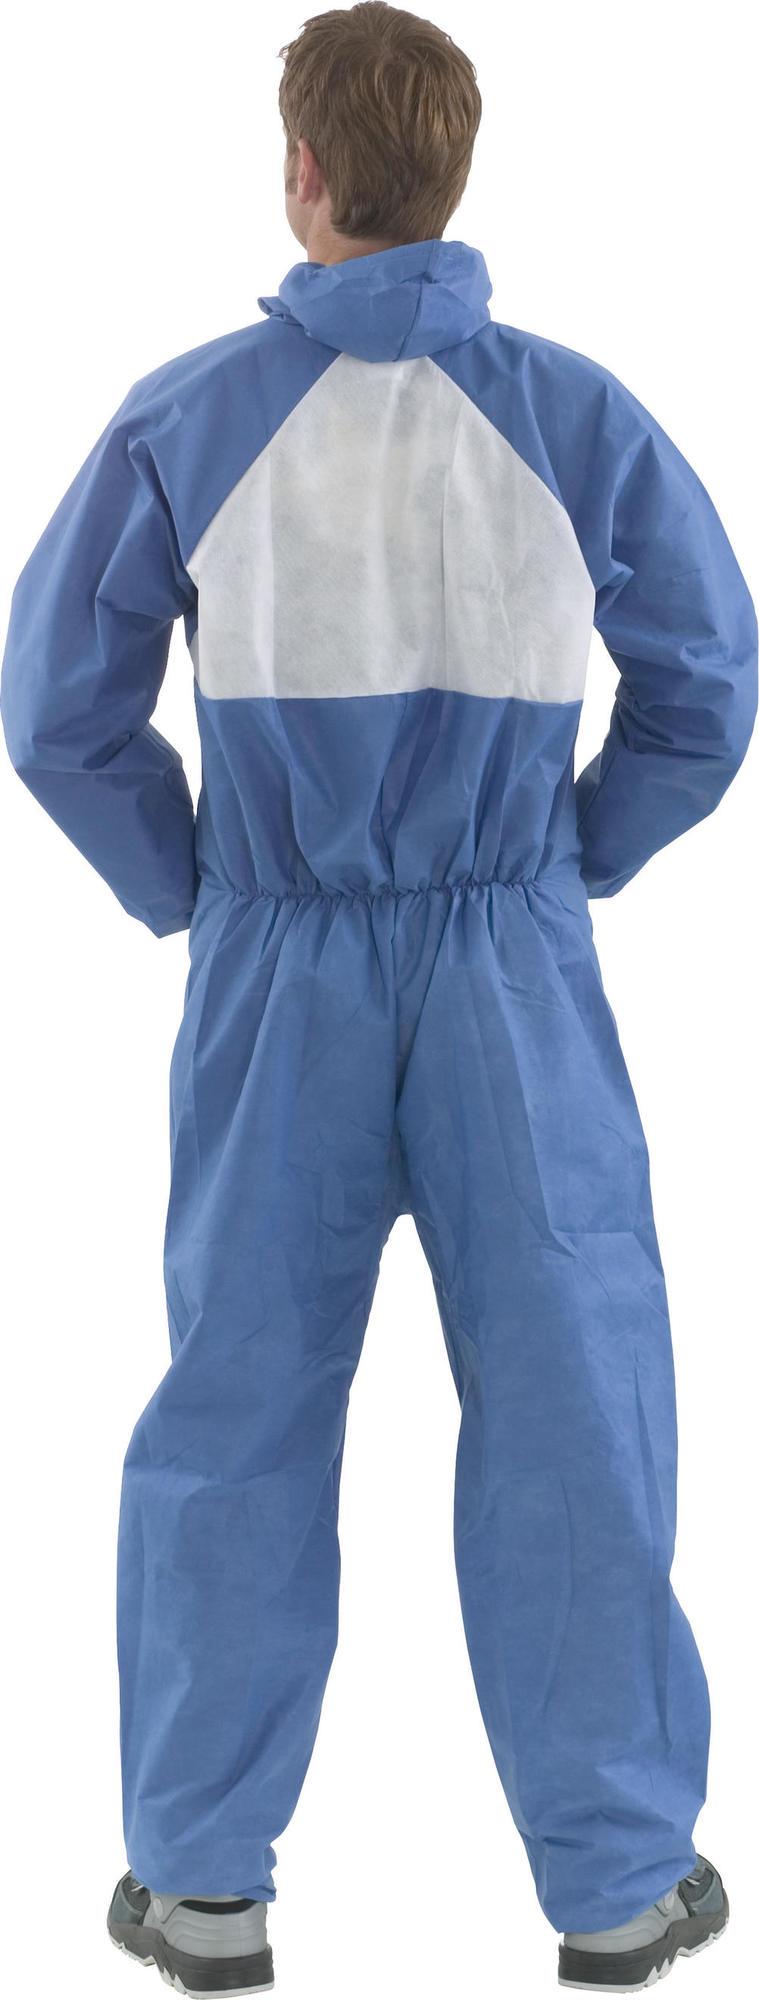 3M 4530 Type 5/6 limited flame protection blue disposable hooded coverall